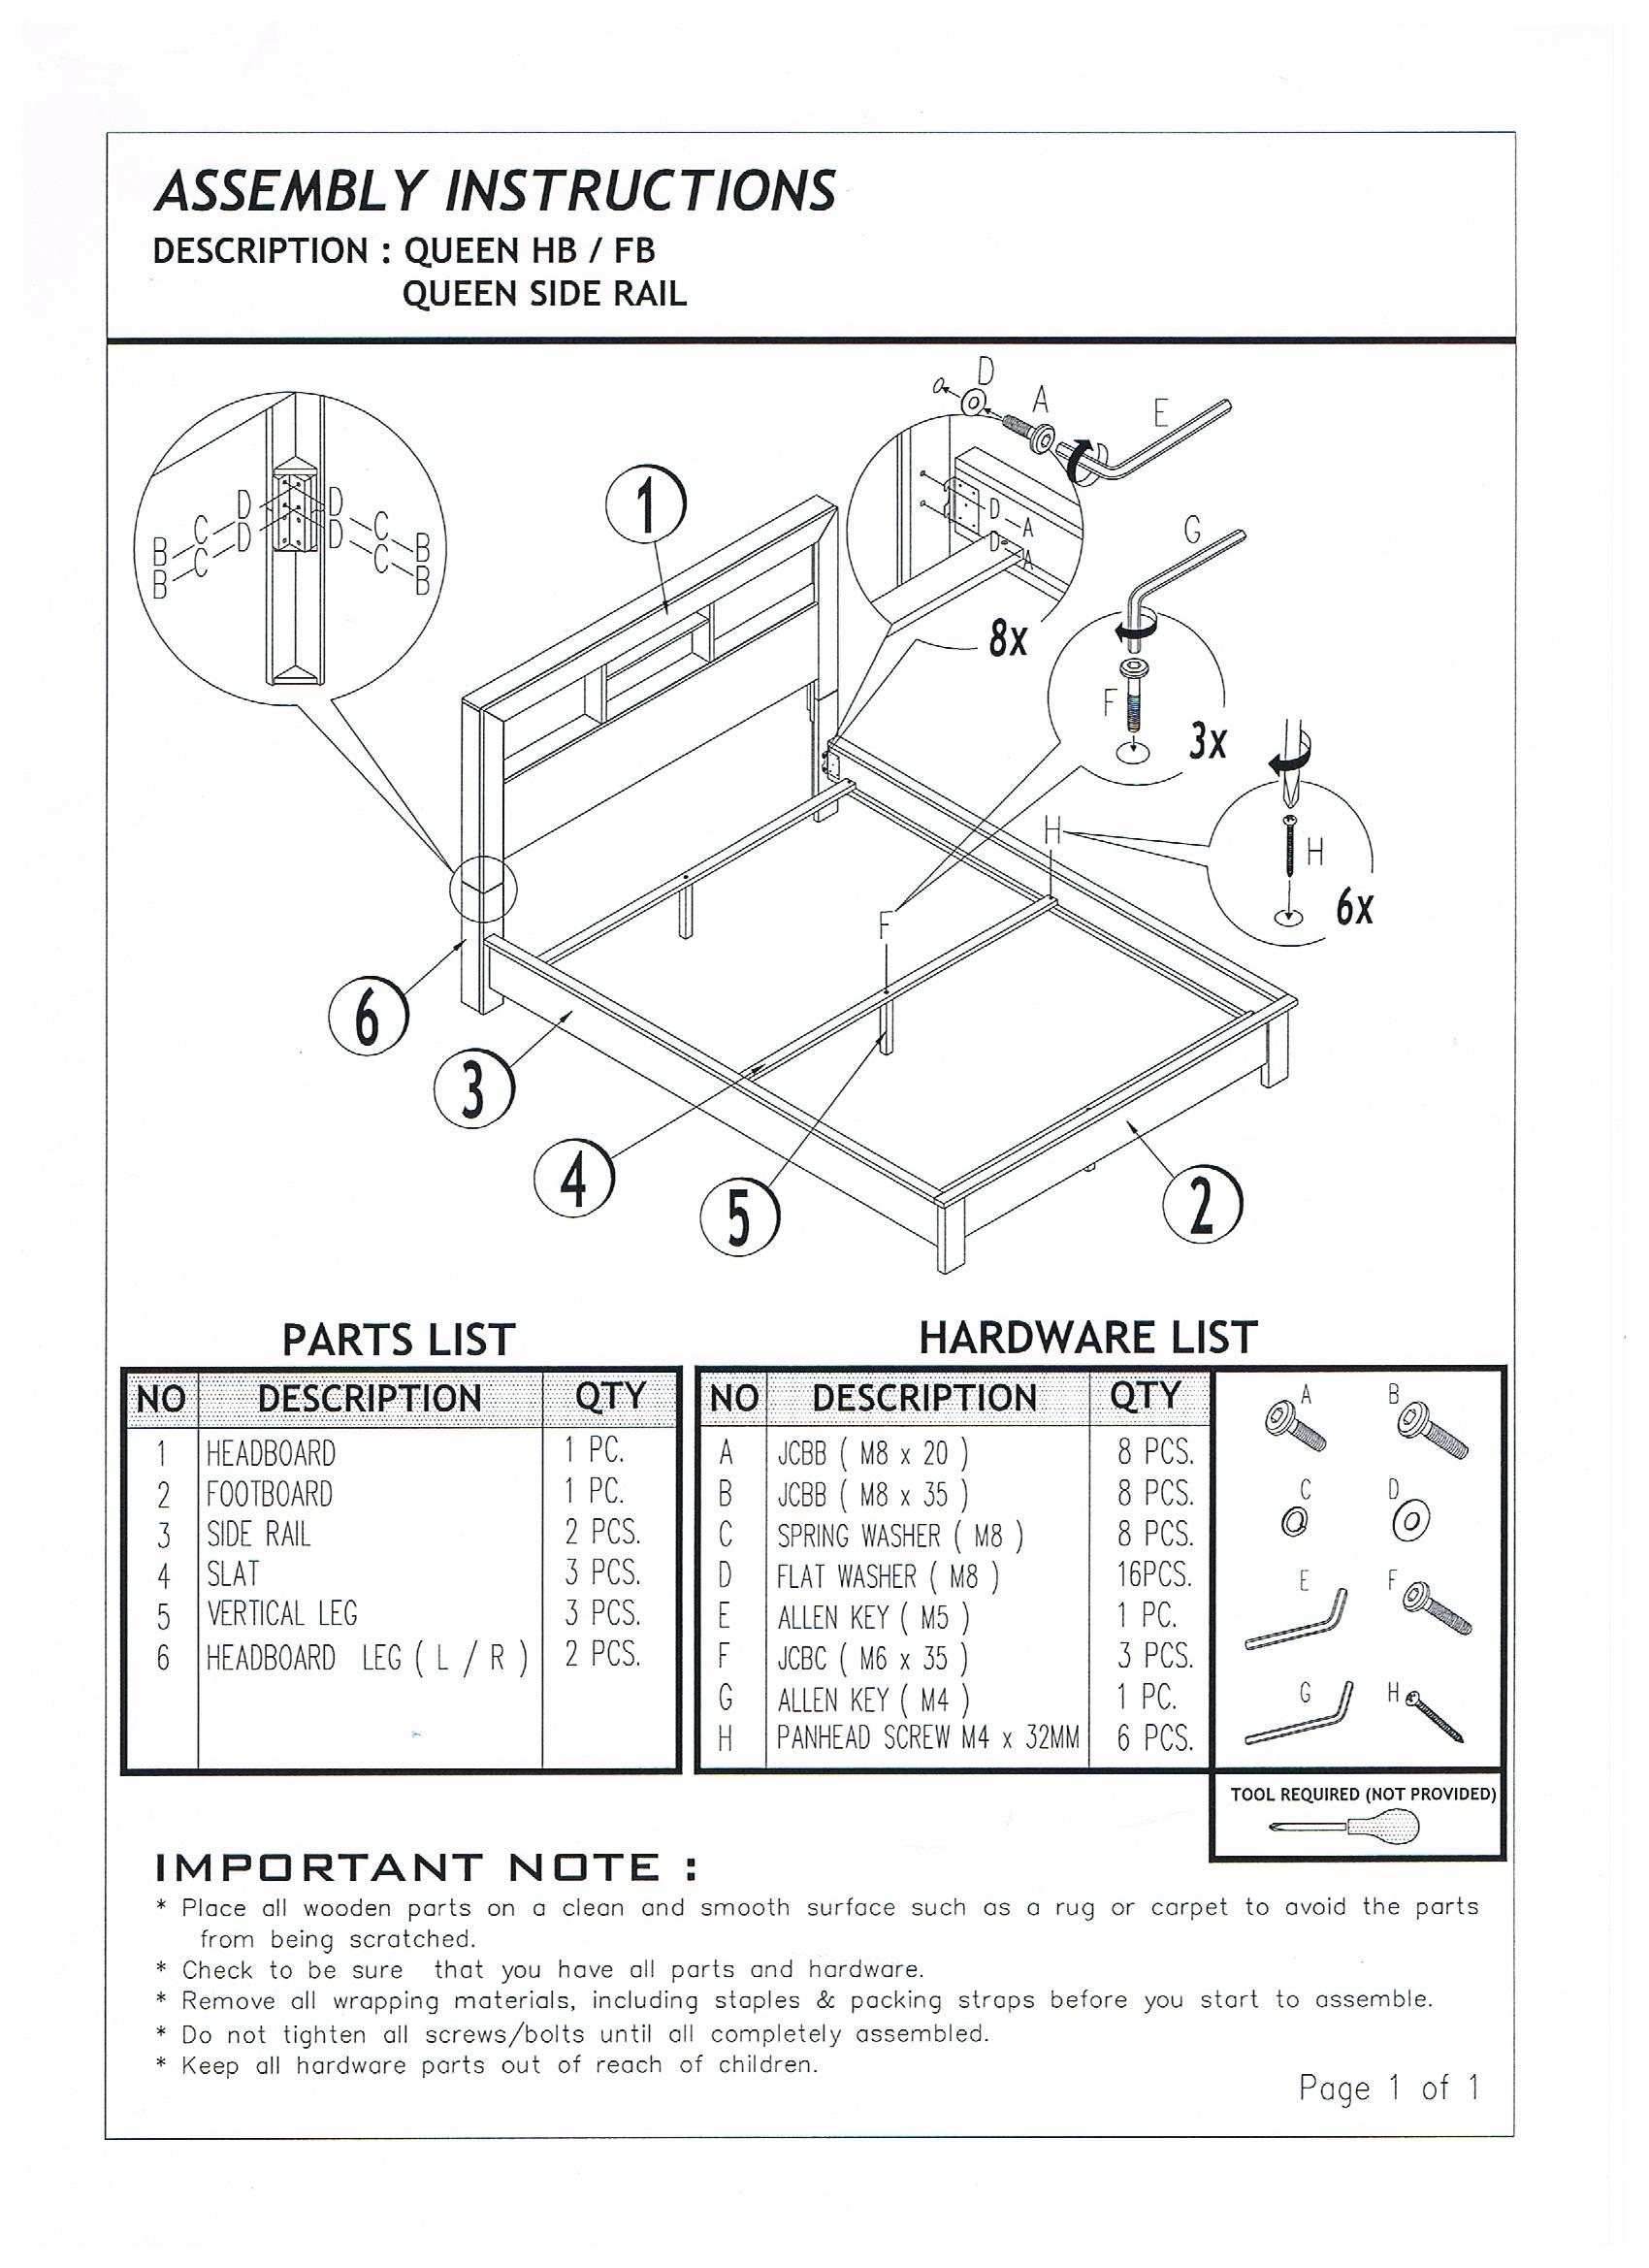 Assembly Instructions, King Bed Frame Assembly Instructions